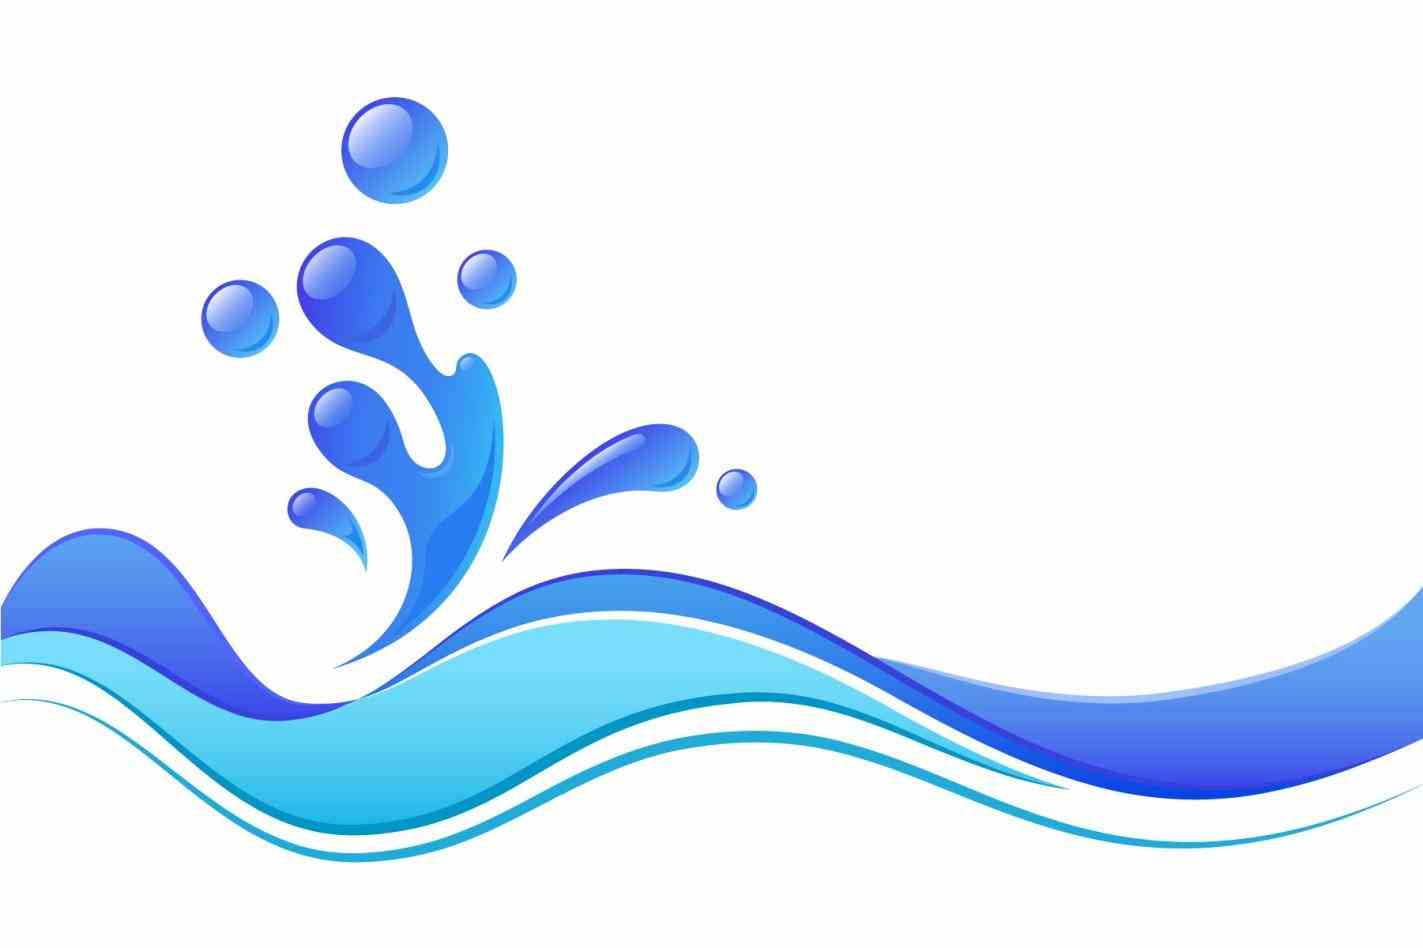 Flowing river clipart.